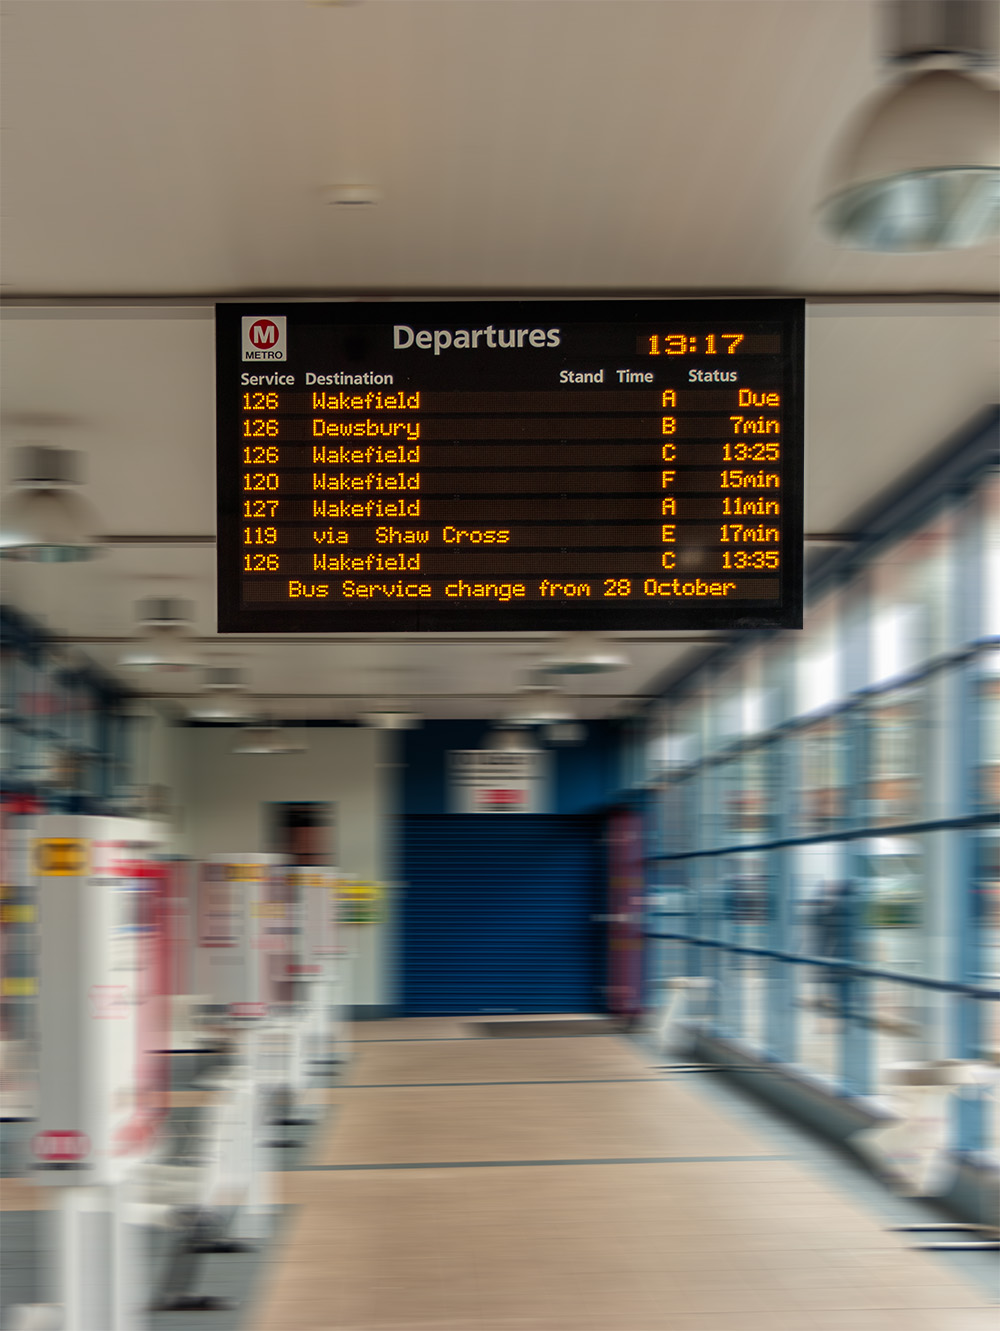 Bus station departure screen shows real time and scheduled departures from different stands. Background is a blurred image of entry gates to the bus station.